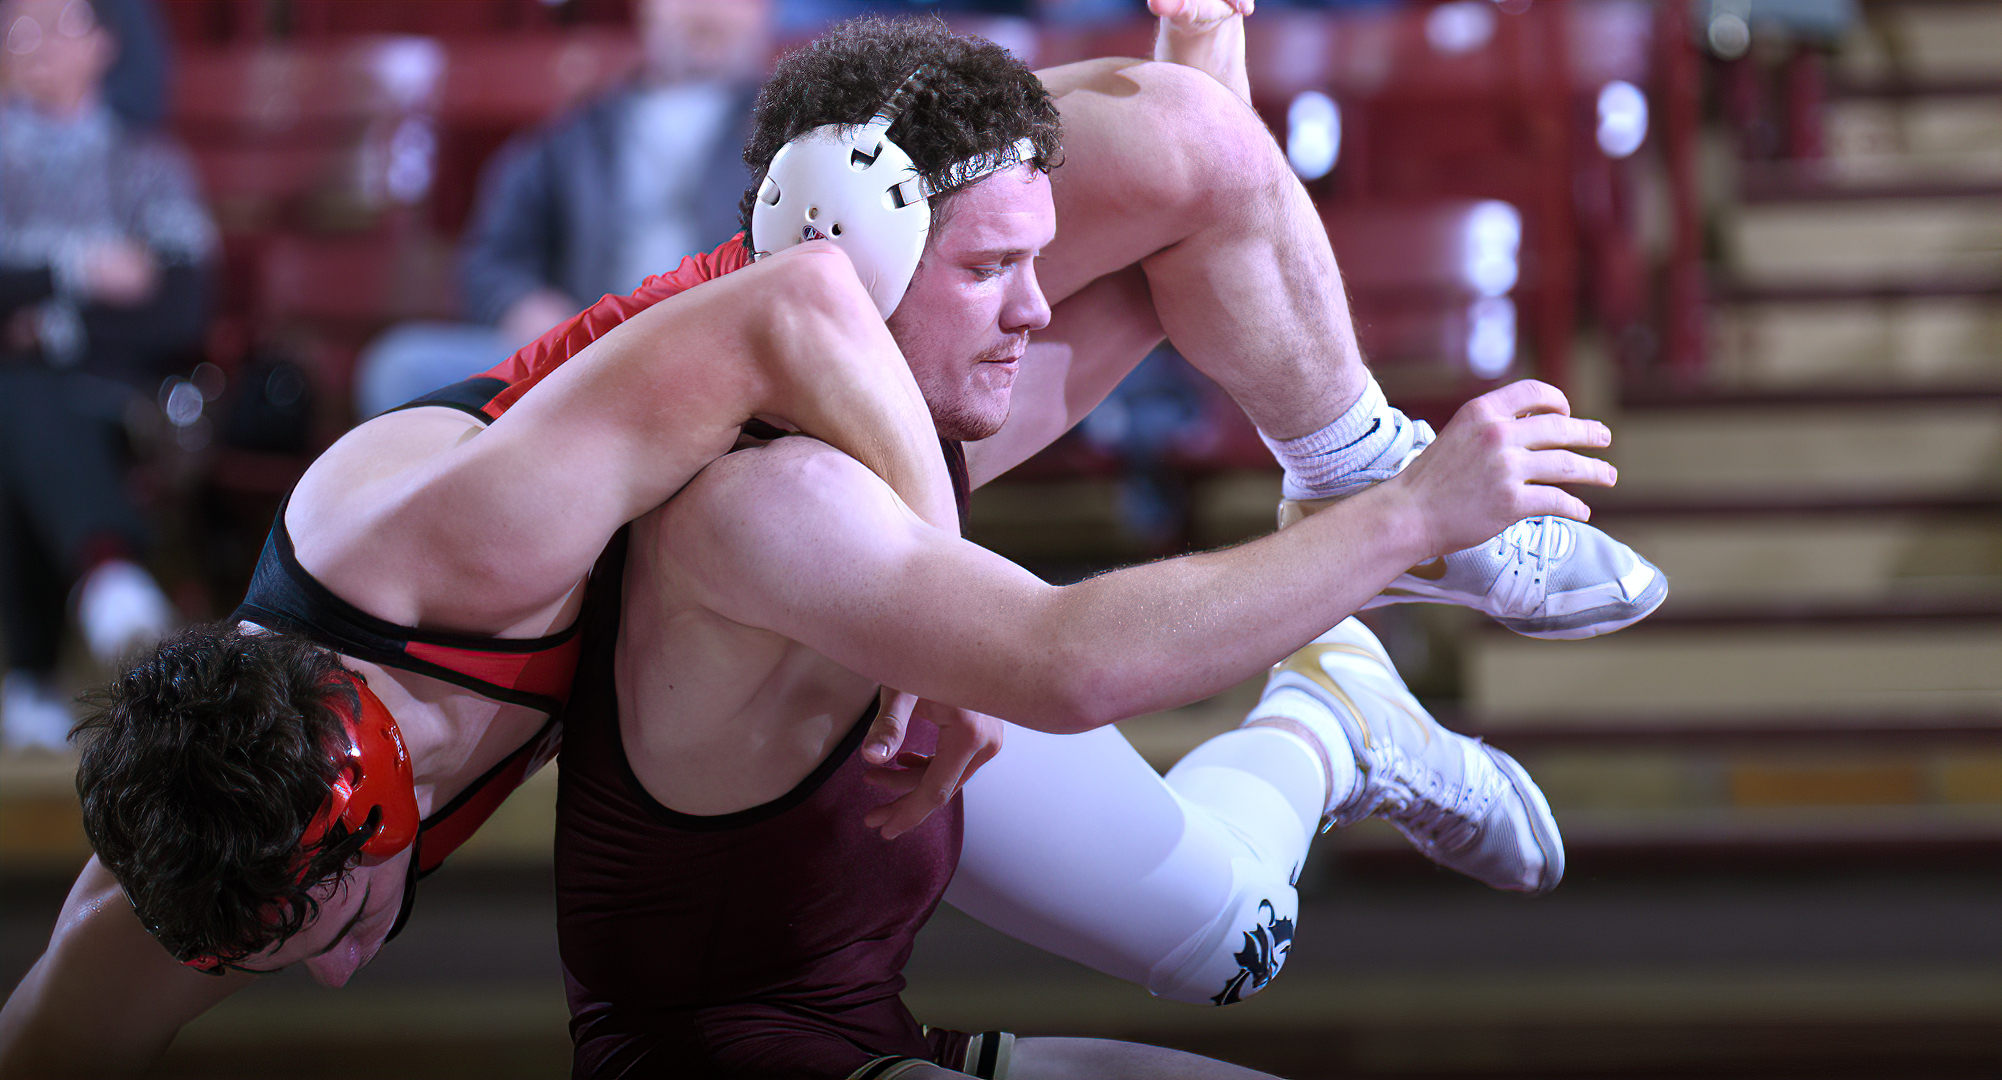 Senior Jacob Prunty won by pin in his match against Dickinson State to help the Cobbers claim a 39-9 over DSU at the U of Mary Triangular.